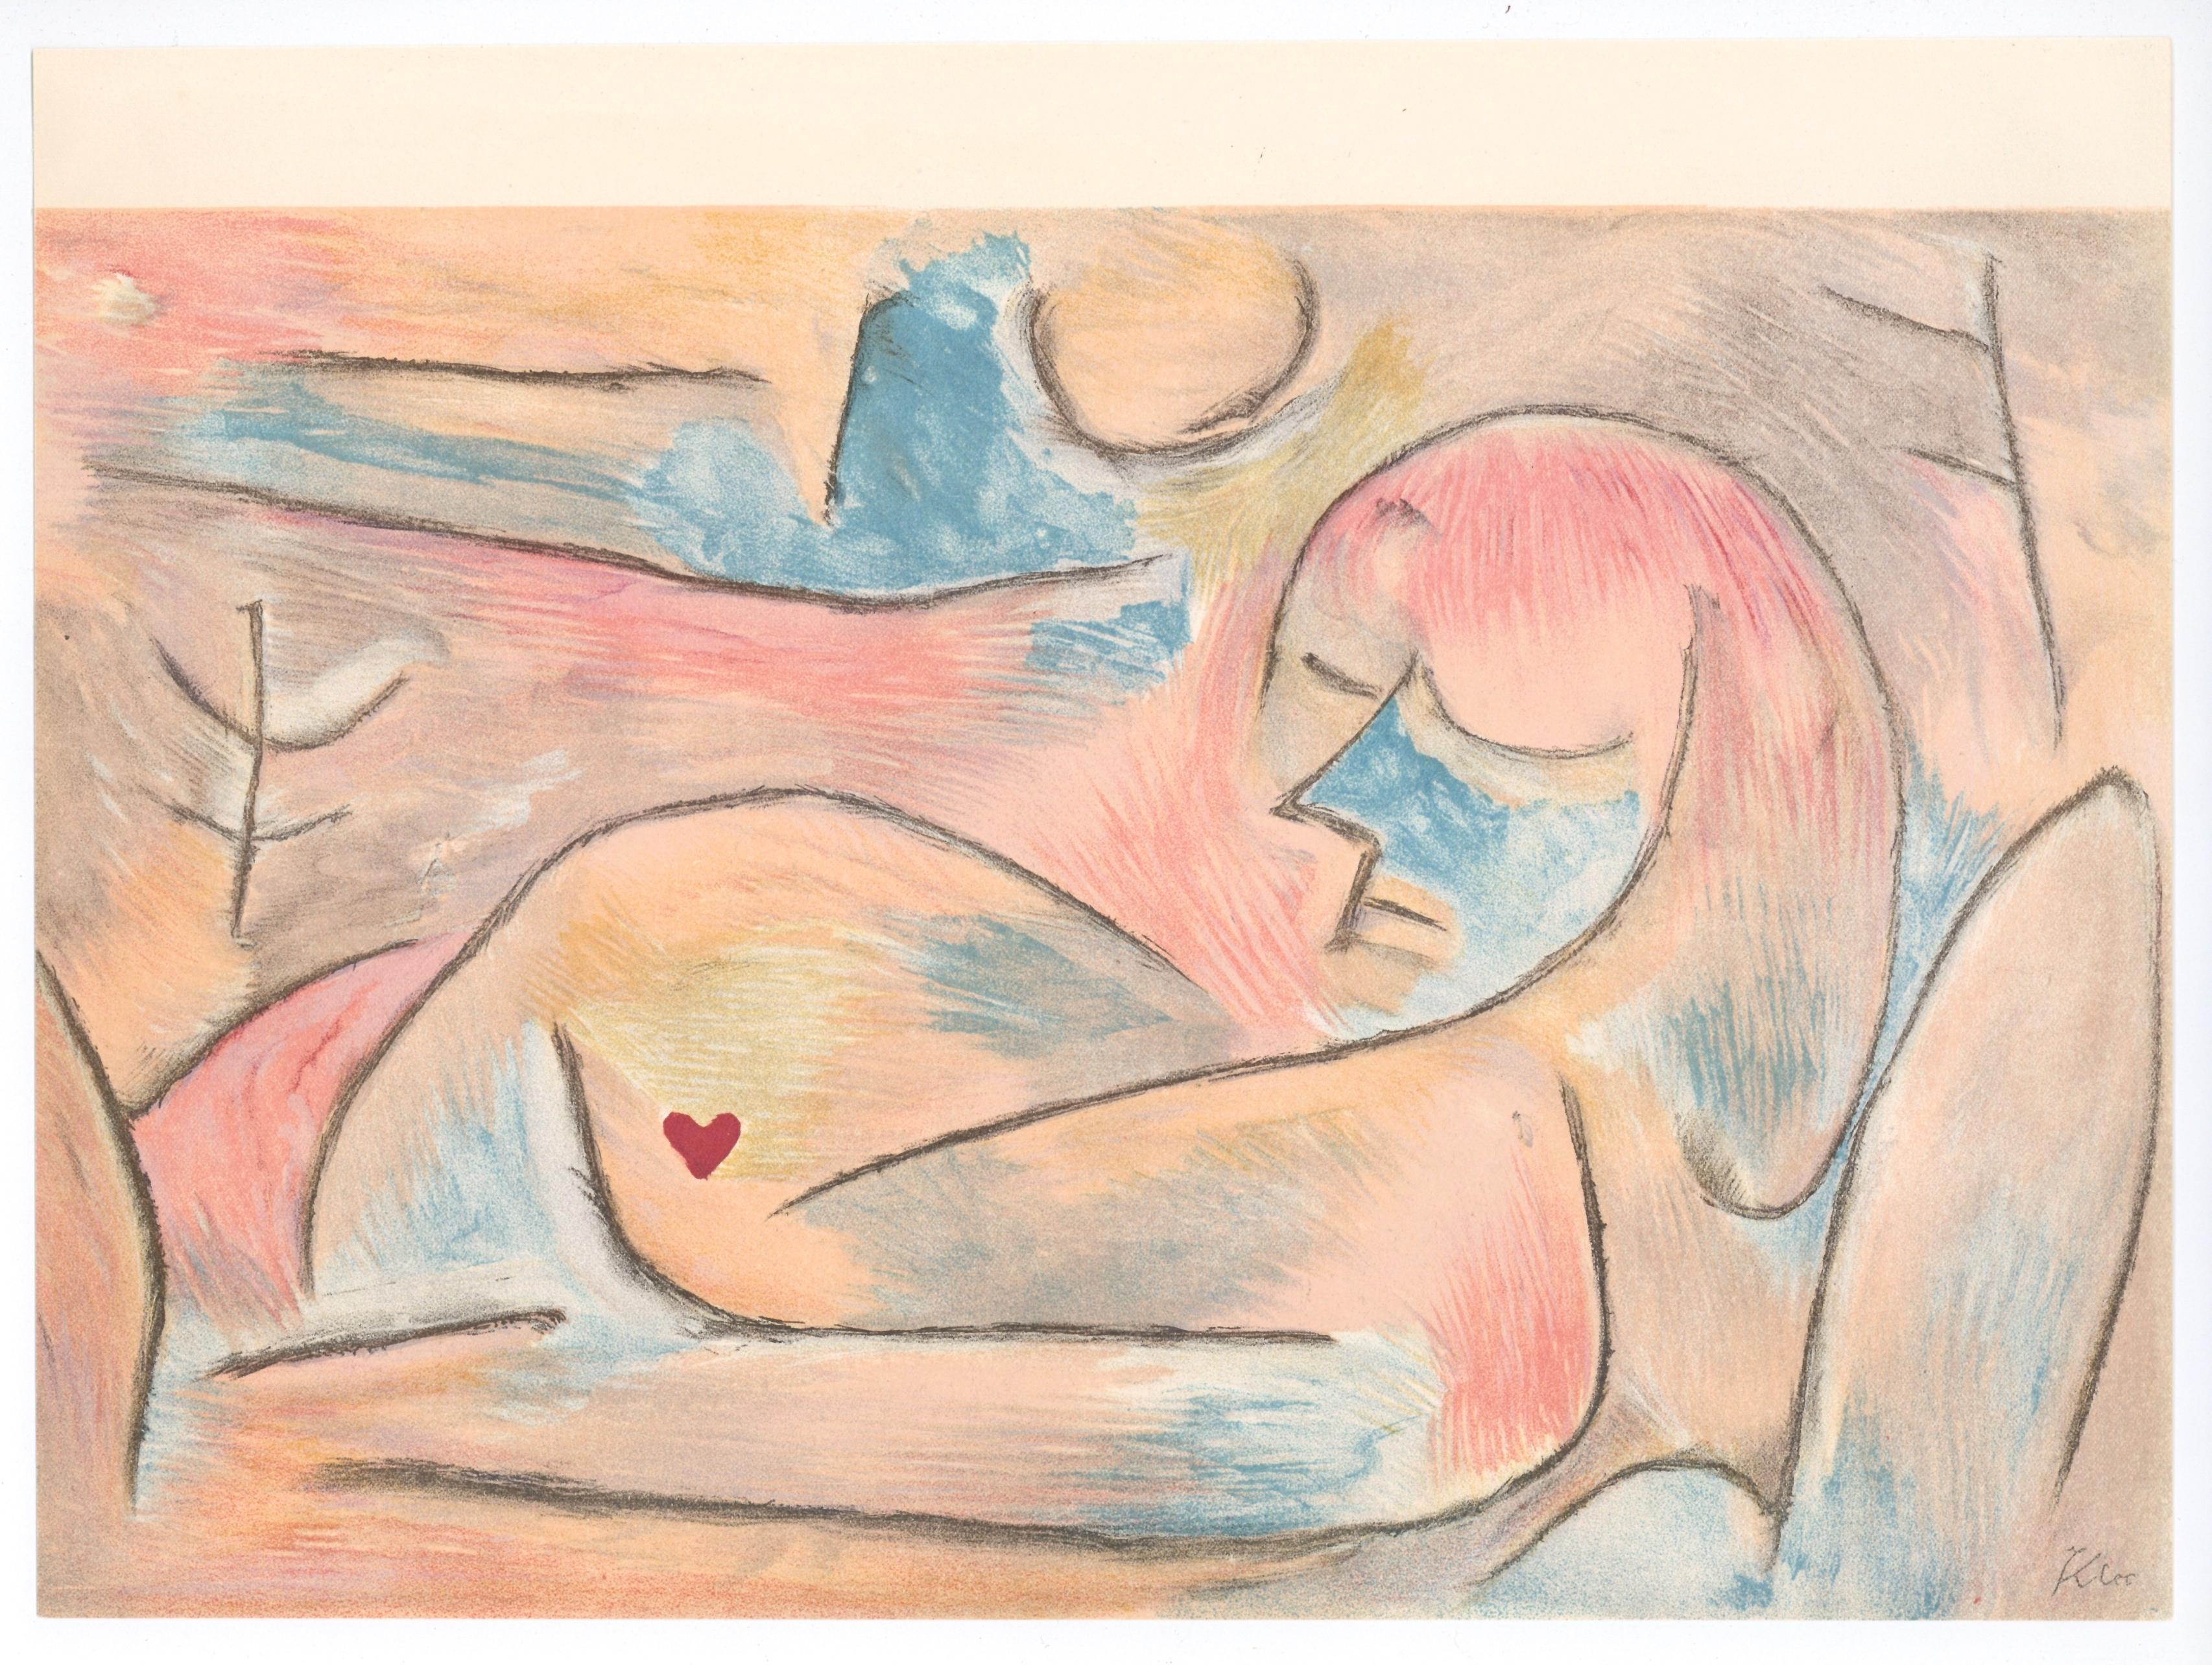 "L'Hiver" lithograph - Print by Paul Klee